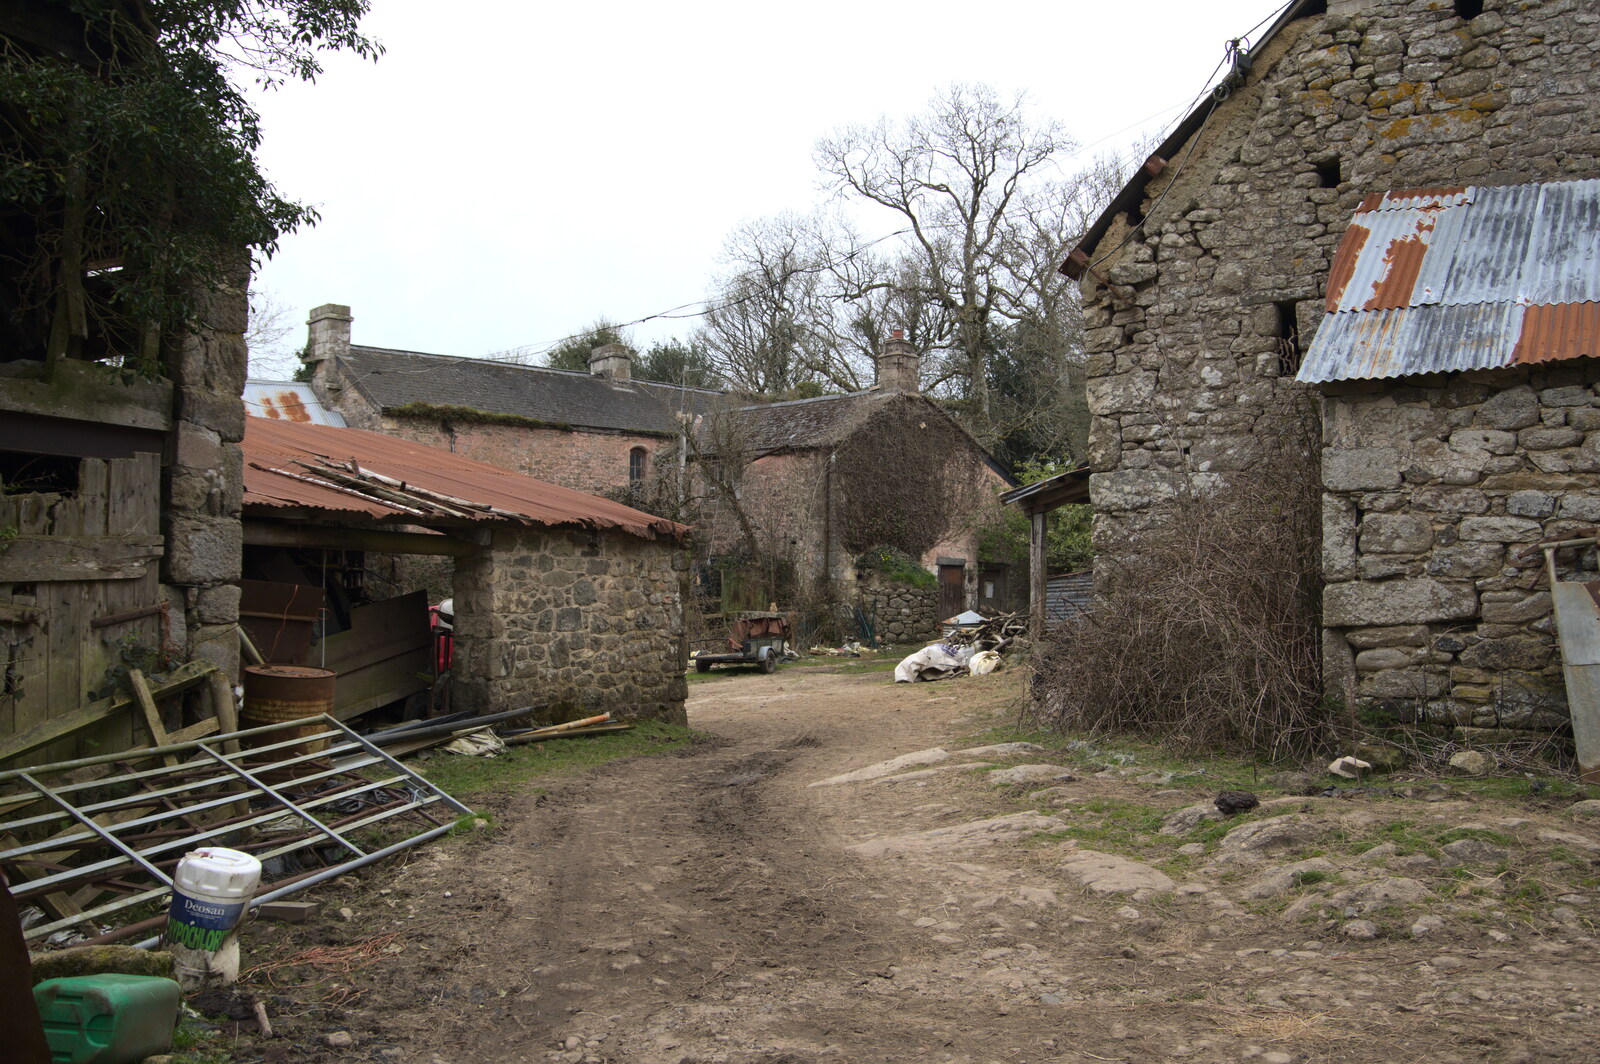 The awesomely-derelict Muddy Farm from Easter in South Zeal and Moretonhampstead, Devon - 9th April